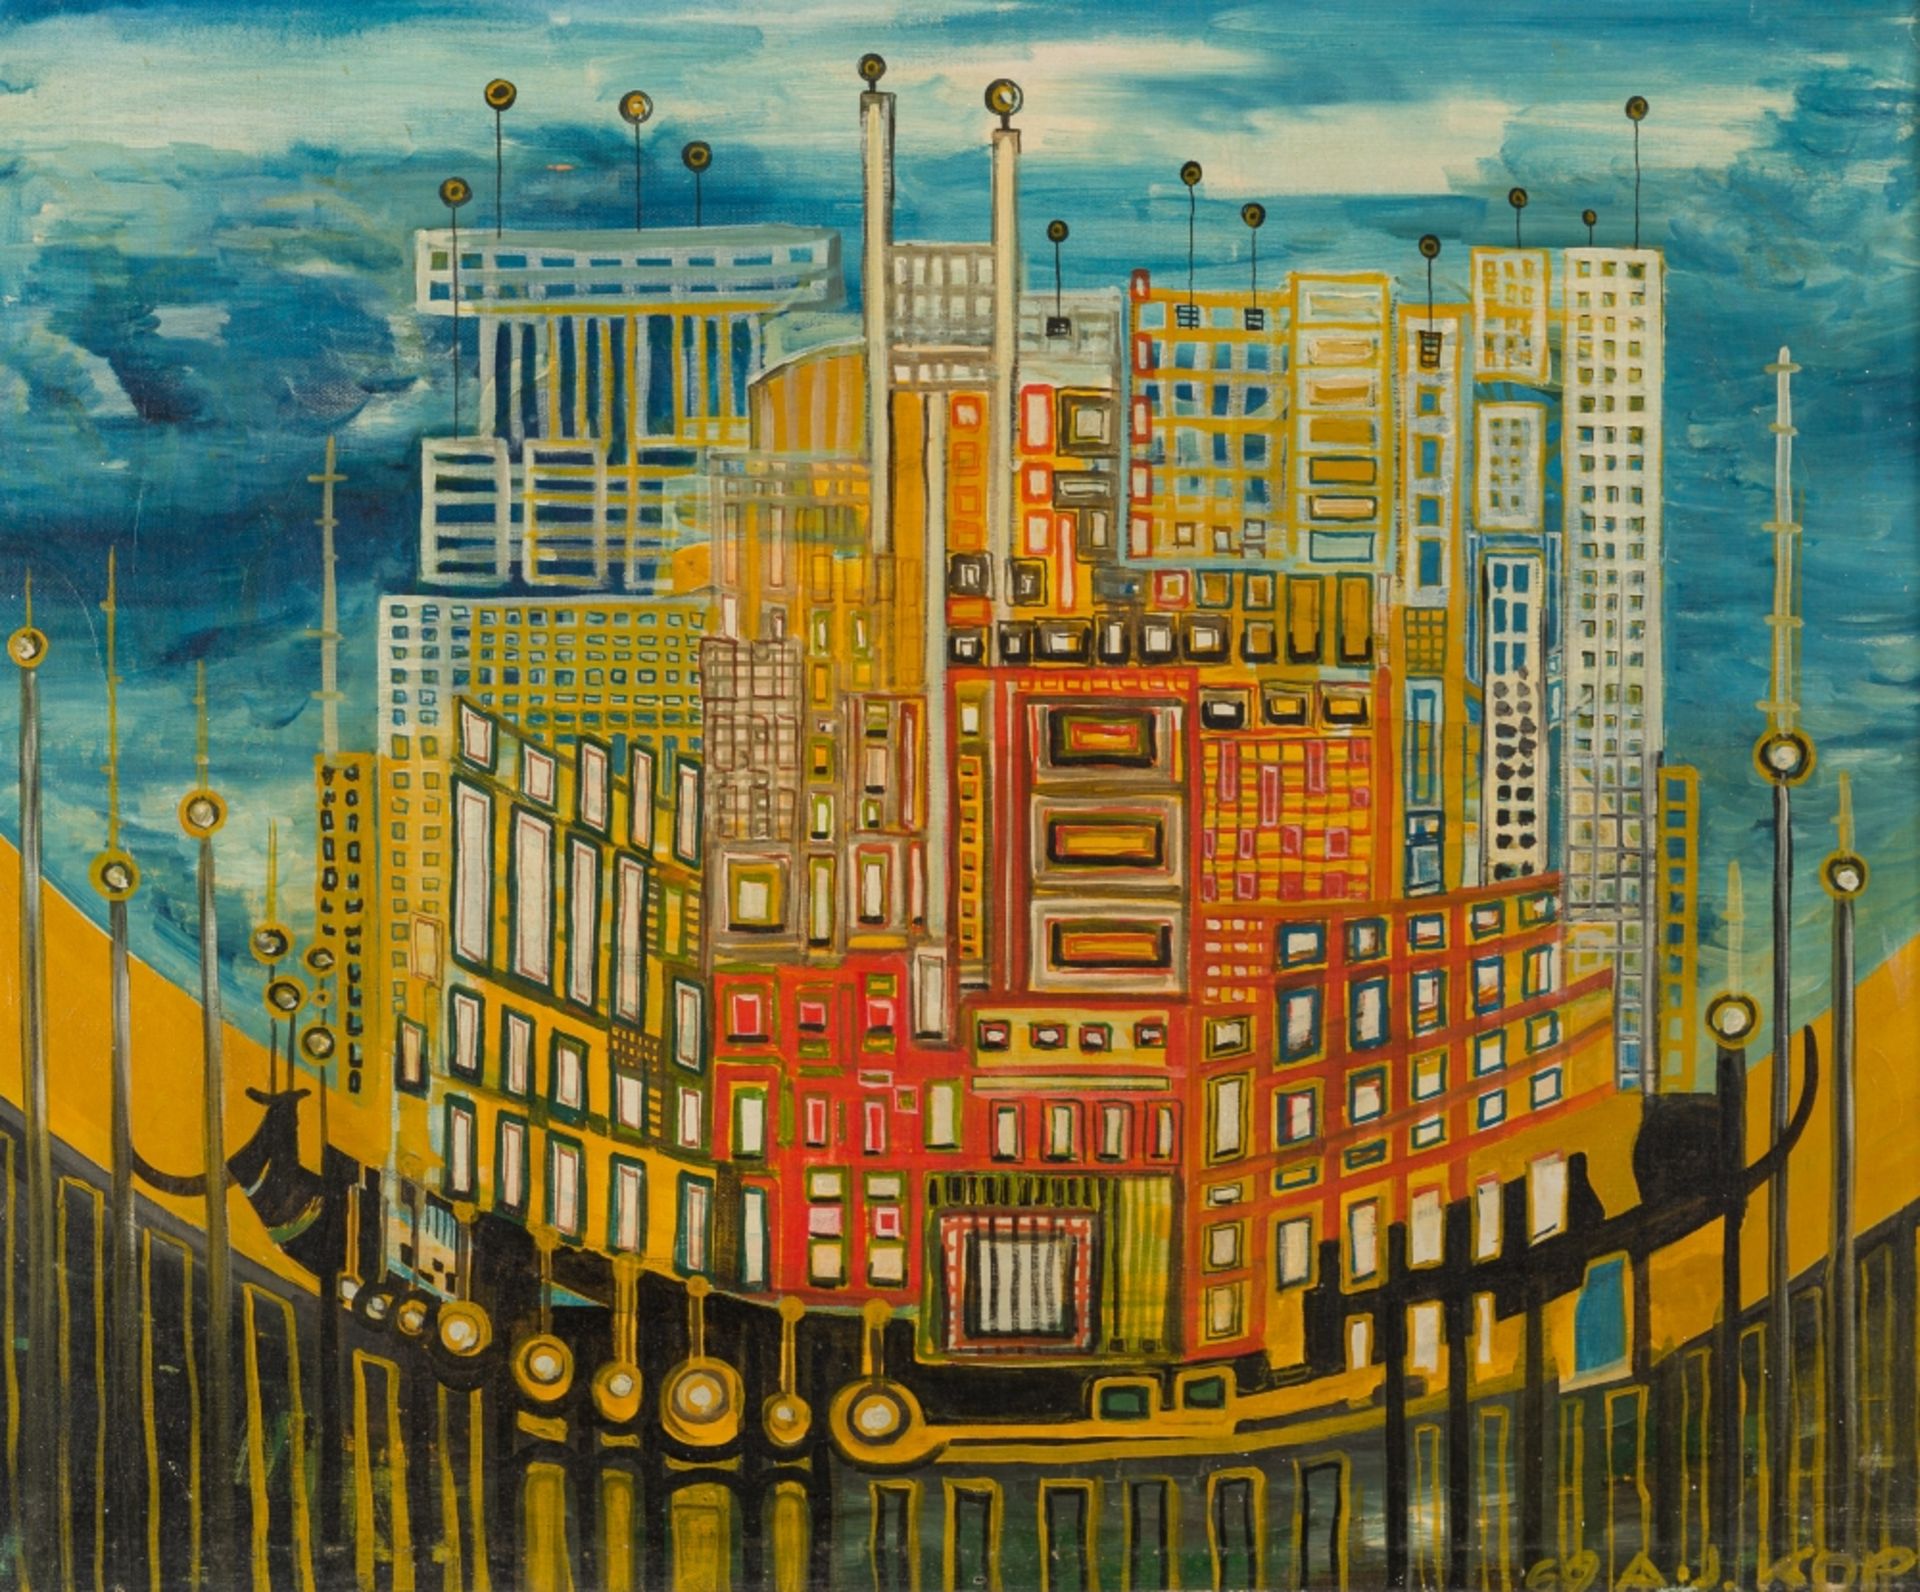 Kopp, A. J.Futuristic City, (19)69Oil on CanvasSigned and dated lower right25,5 x 31,7 inFramed